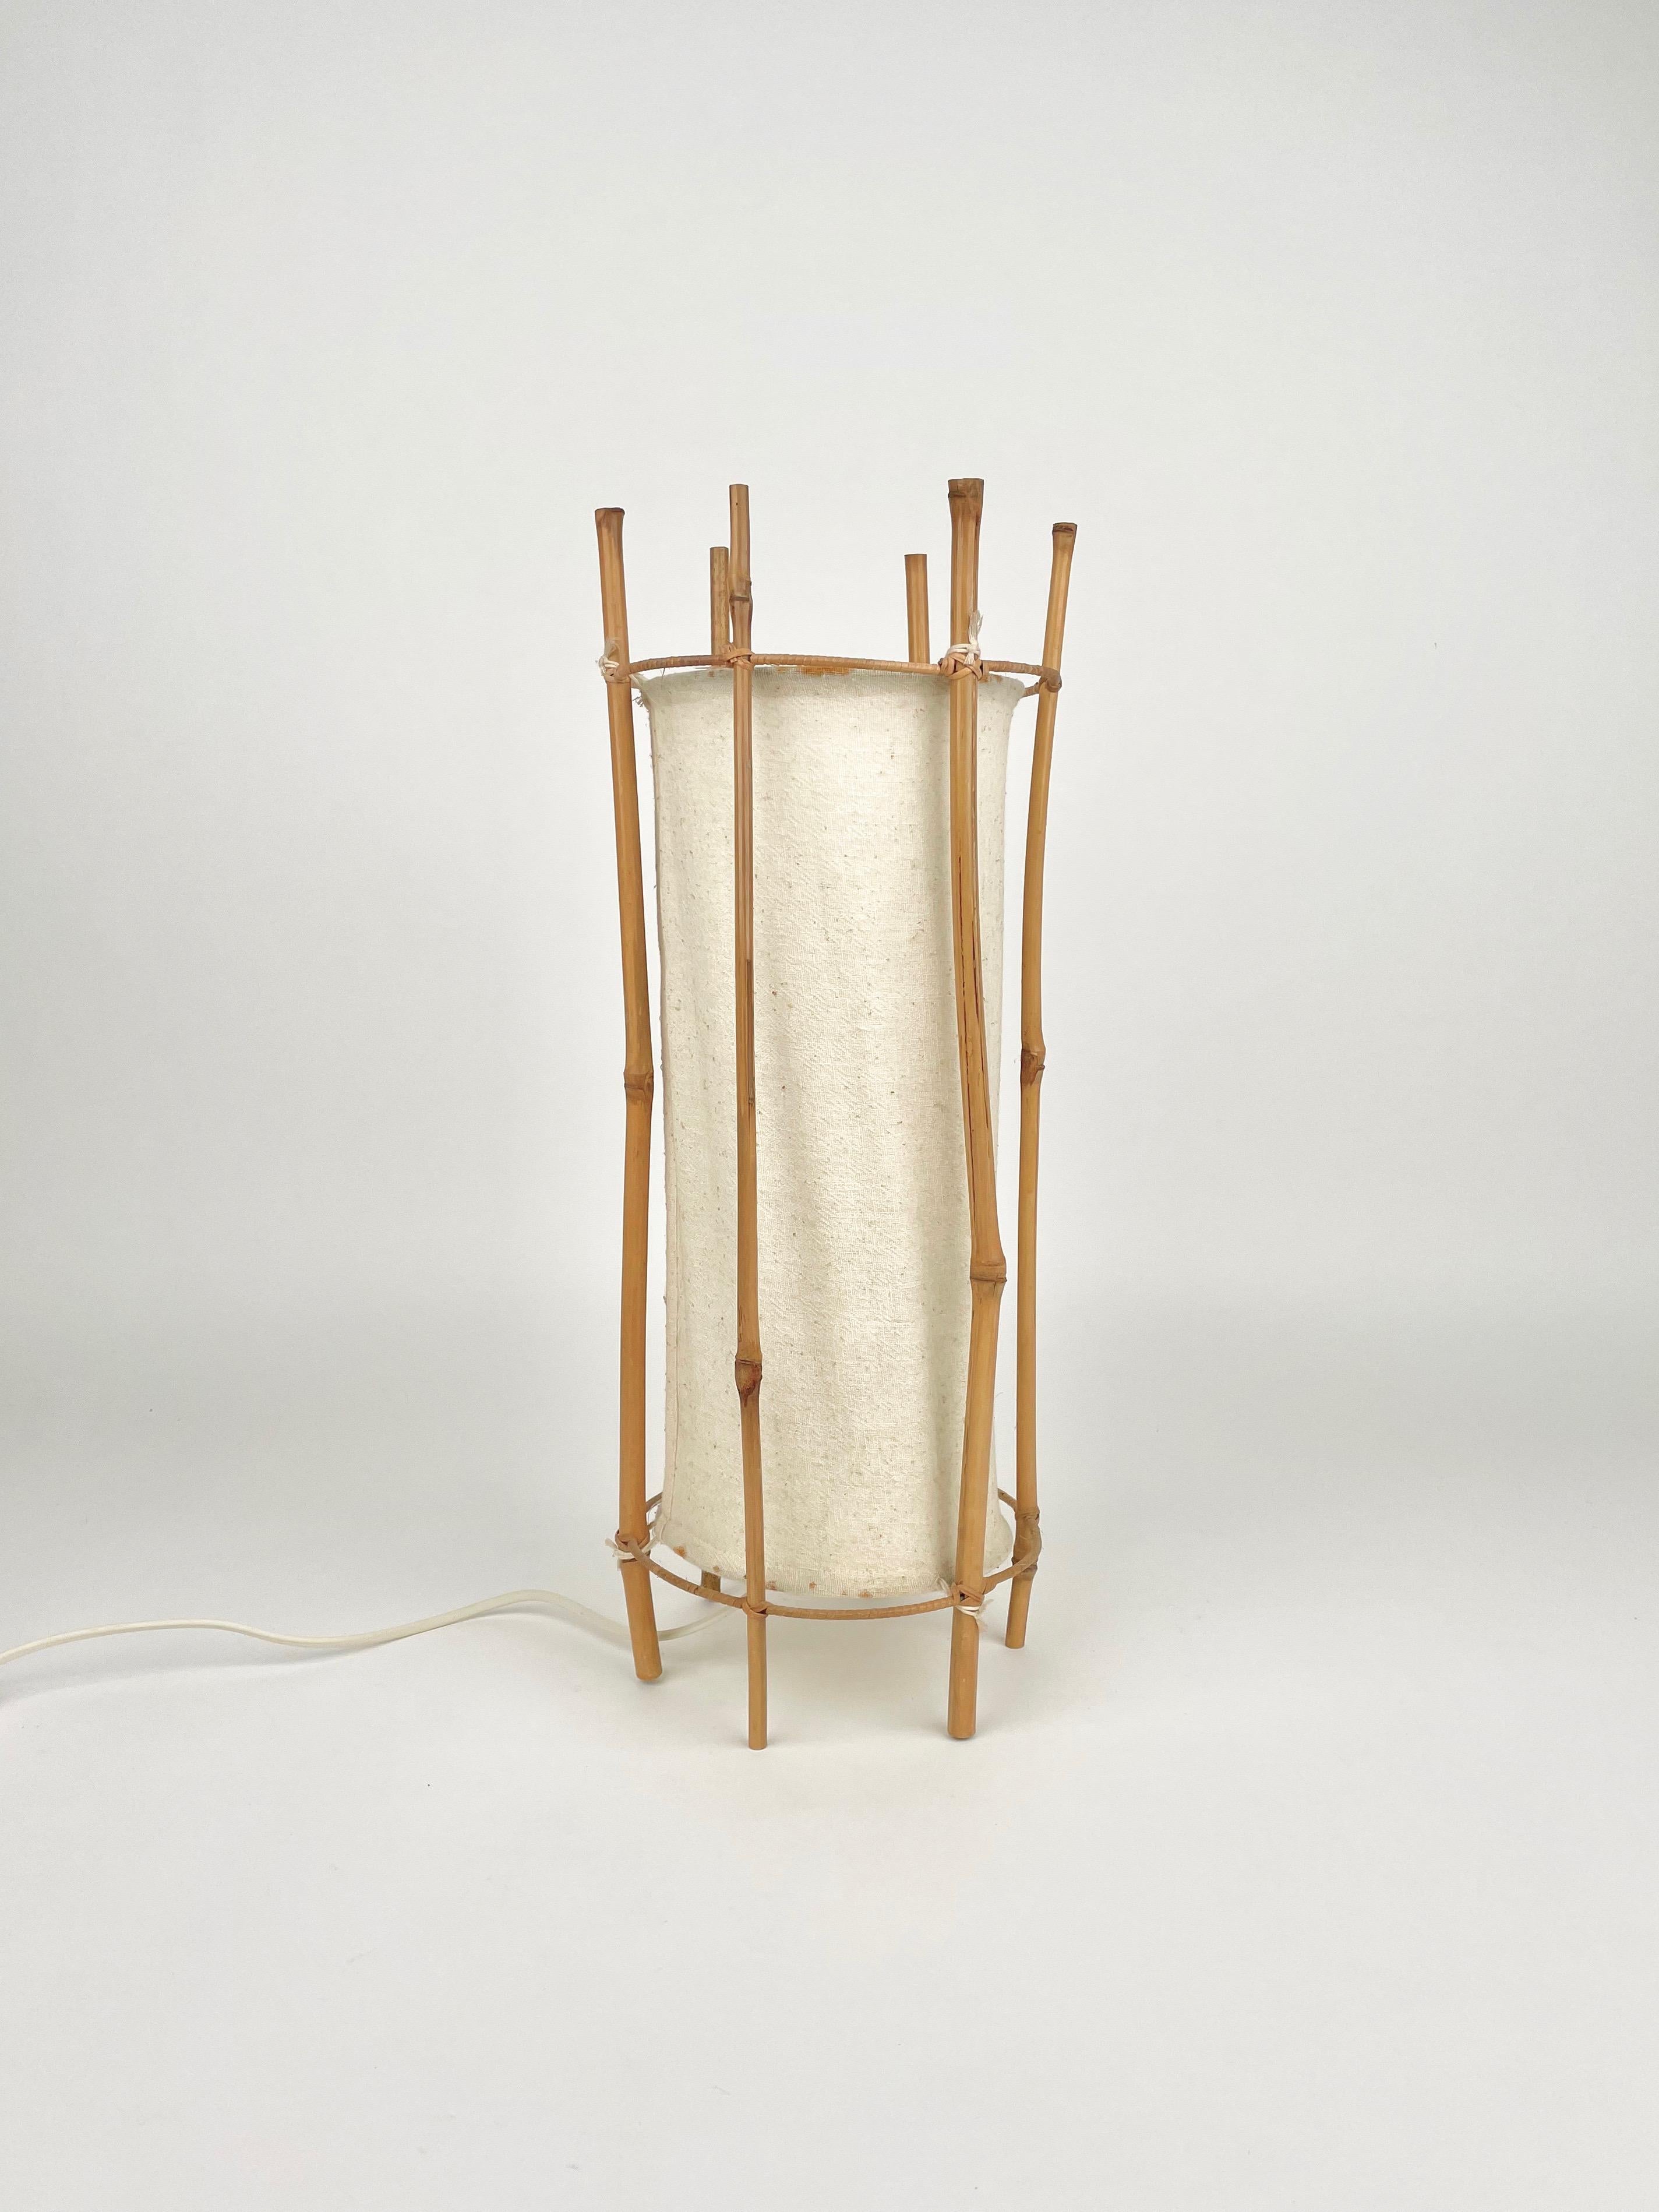 Cylindrical shape table lamp in white cotton featuring structure in bamboo composed of six stems. Attributable to the French designer Louis Sognot, made in France in the 1950s.